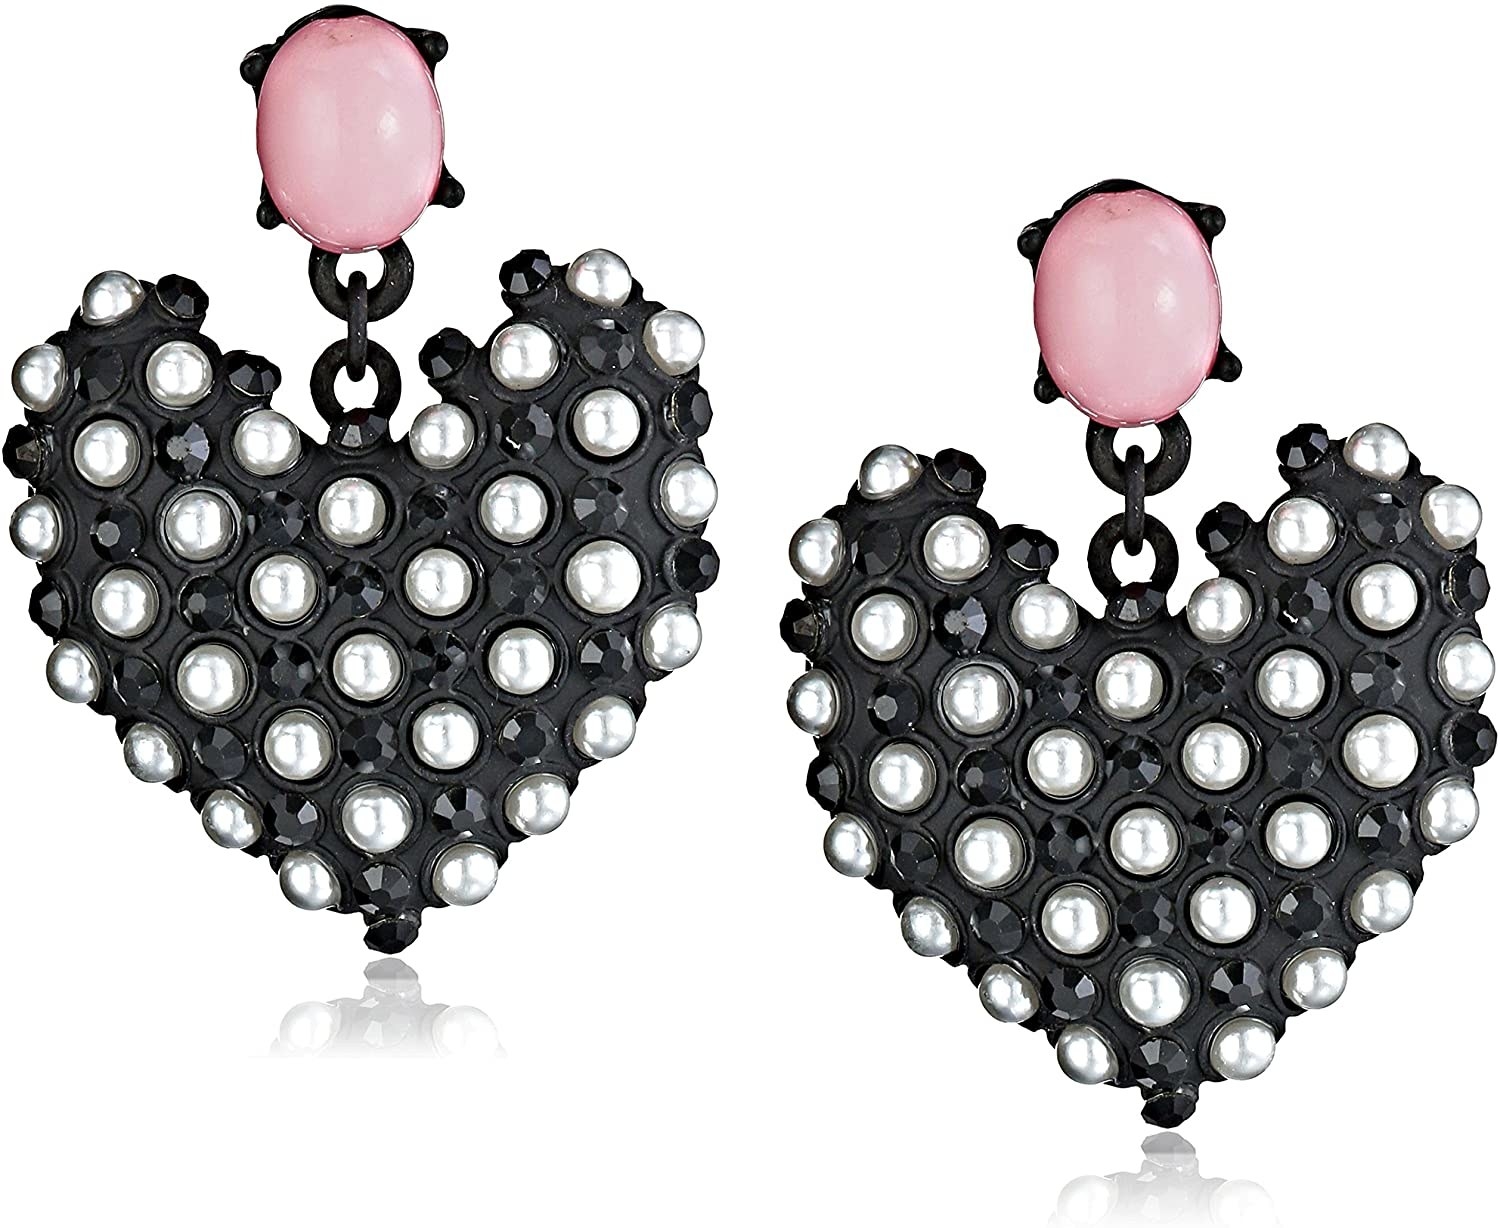 The black rhinestone and pearl heart drop earrings with pink posts